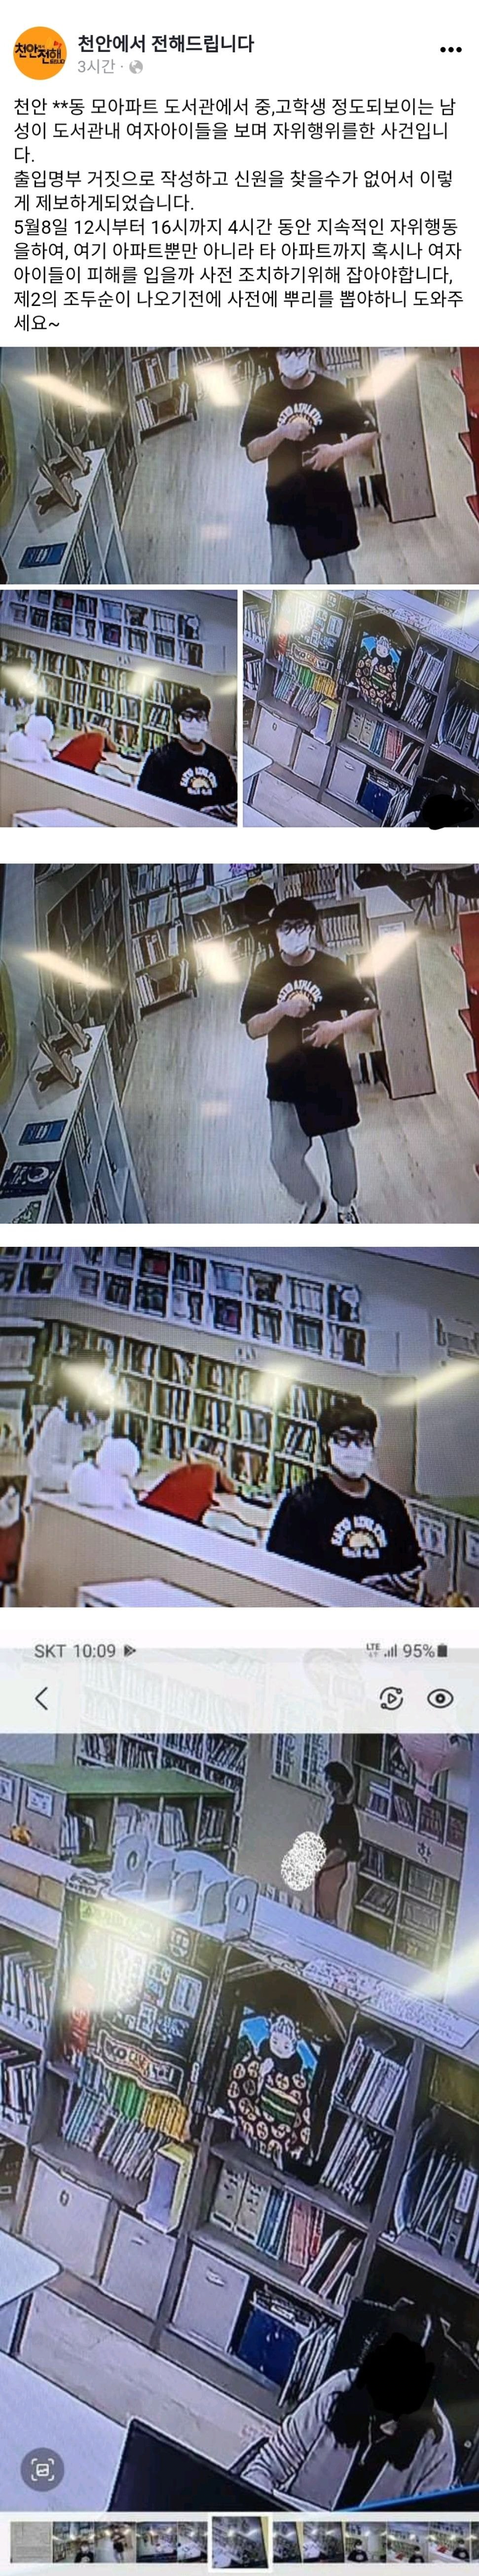 I'm looking for a self-defense man who slept for 4 hours continuously at Cheonan Library.